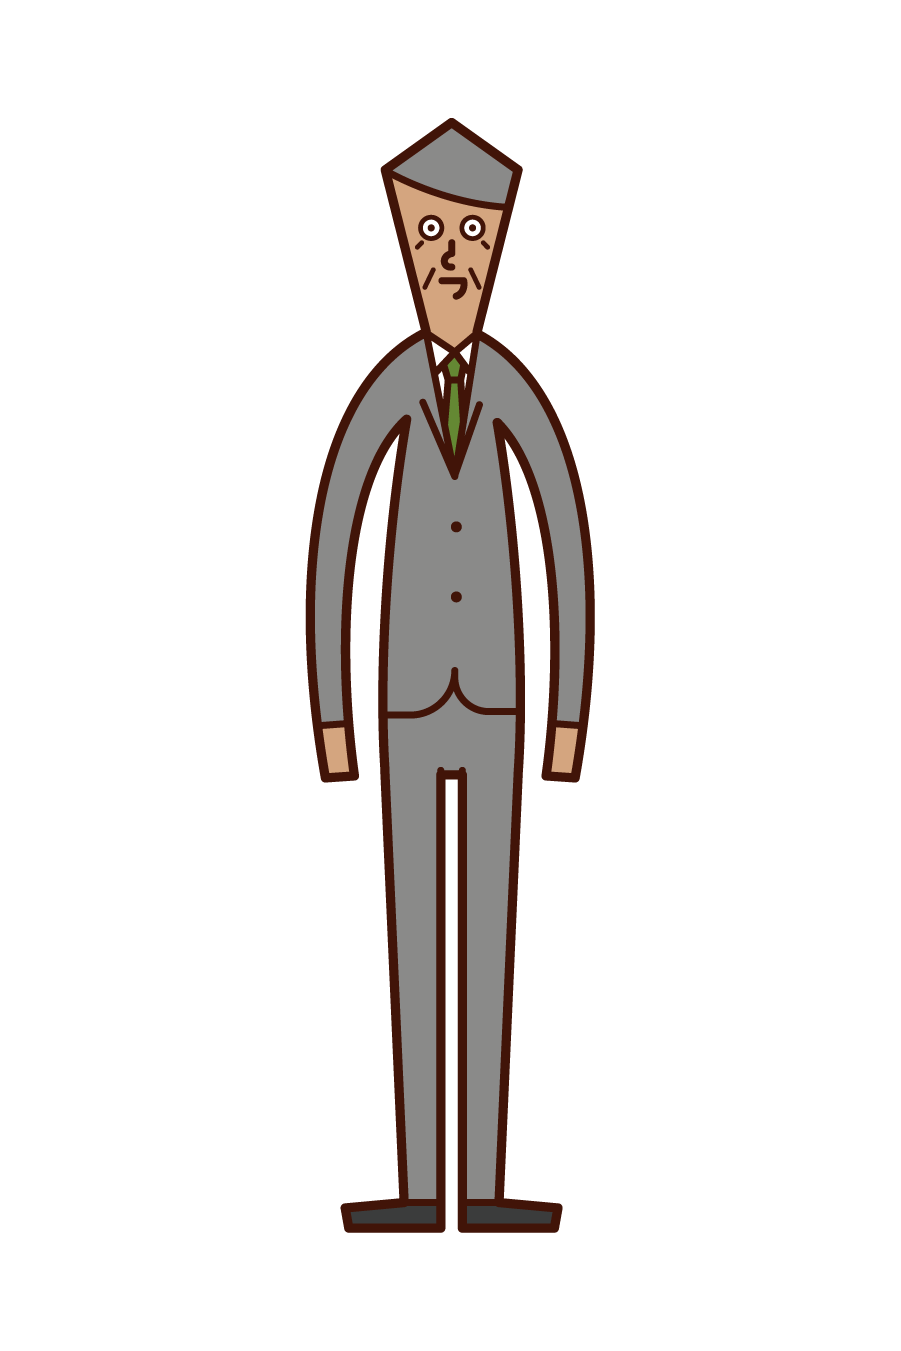 Illustration of an old man in a suit